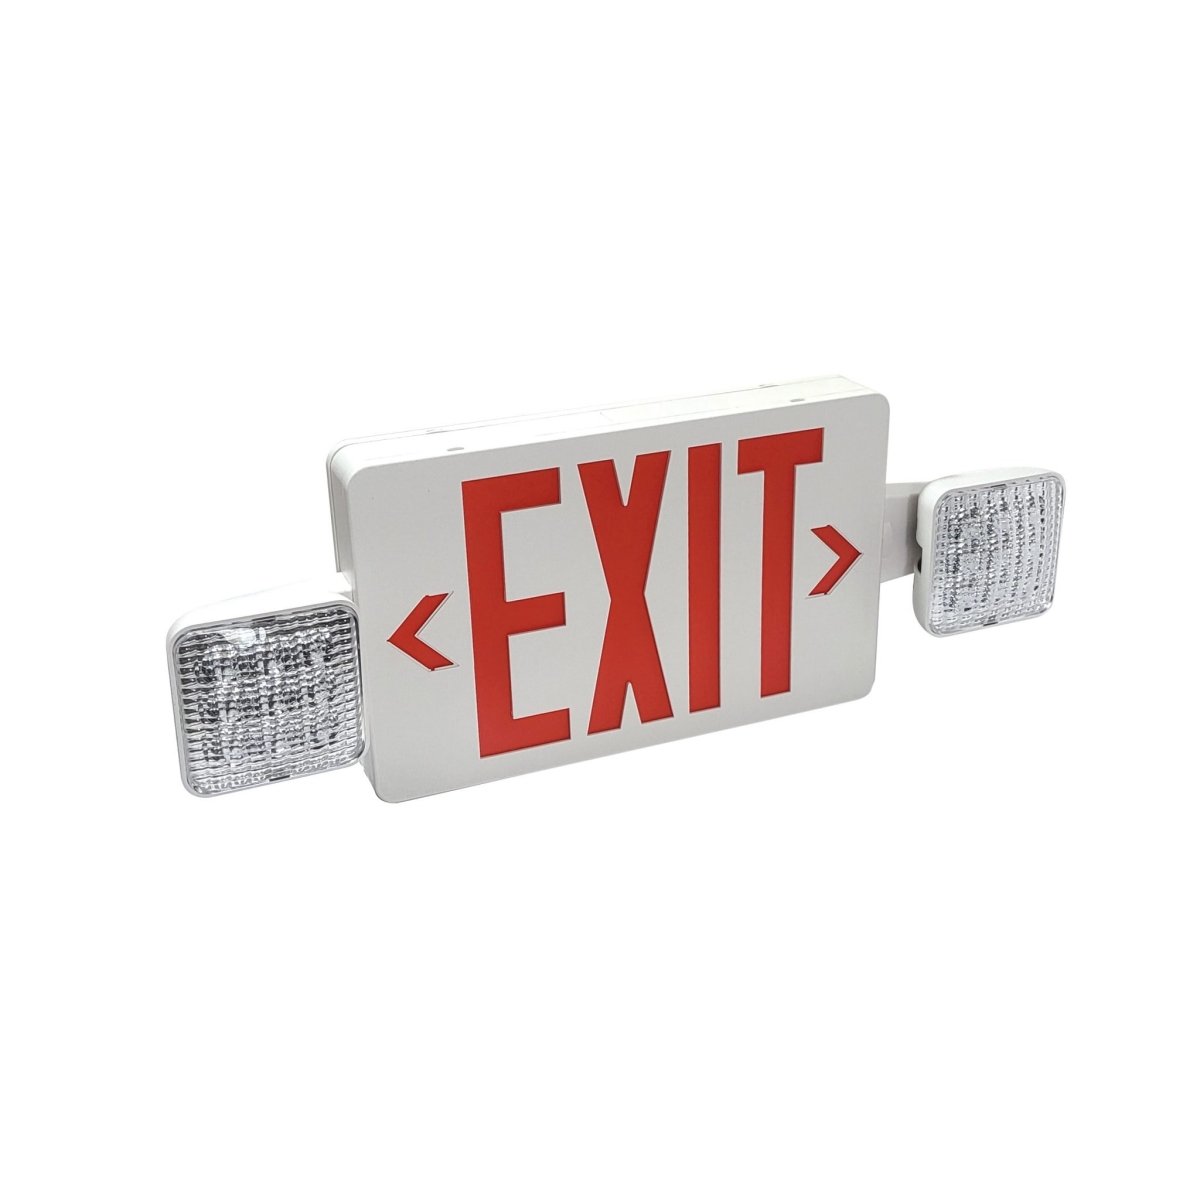 Picture of Nora Lighting NEX-712-LED-RB LED Exit & Emergency Combination with Adjustable Heads